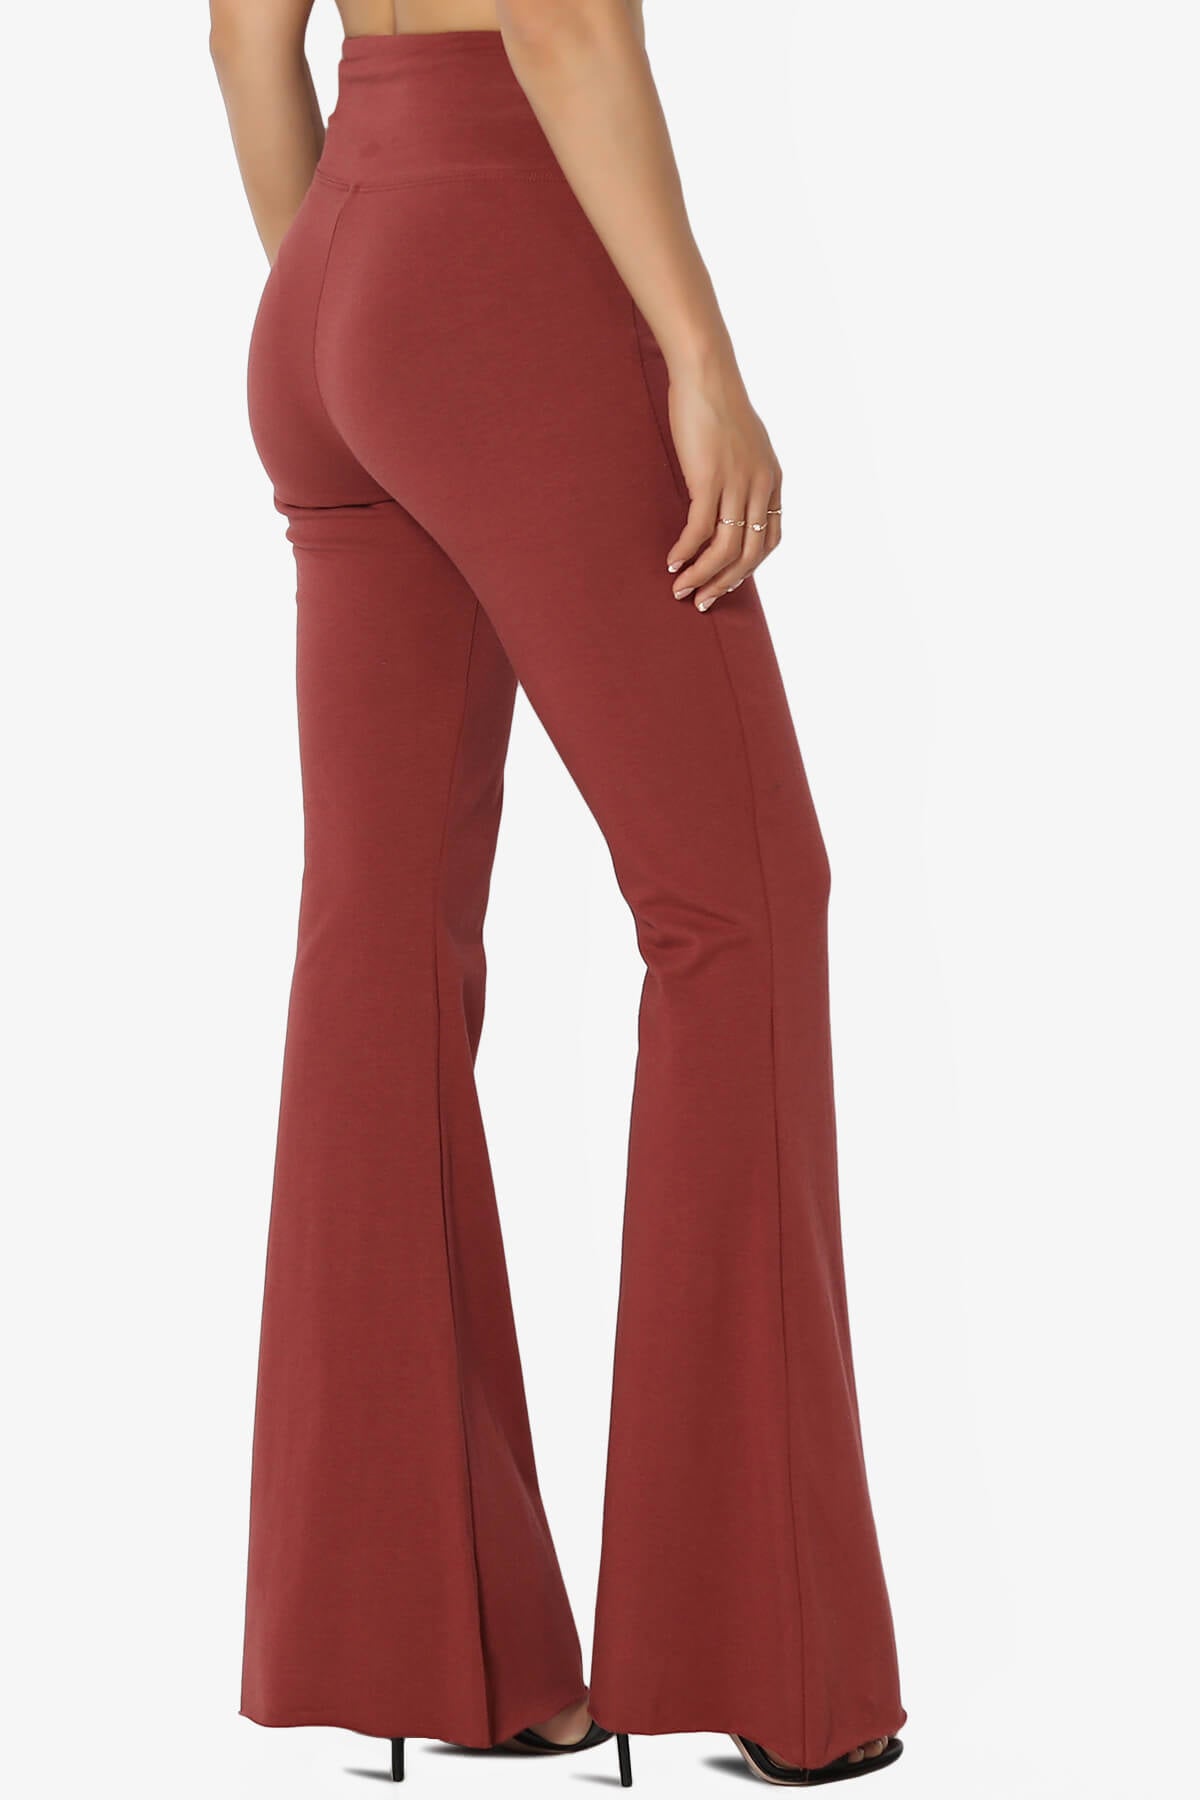 Load image into Gallery viewer, Zaylee Raw Hem Flared Comfy Yoga Pants BRICK_4
